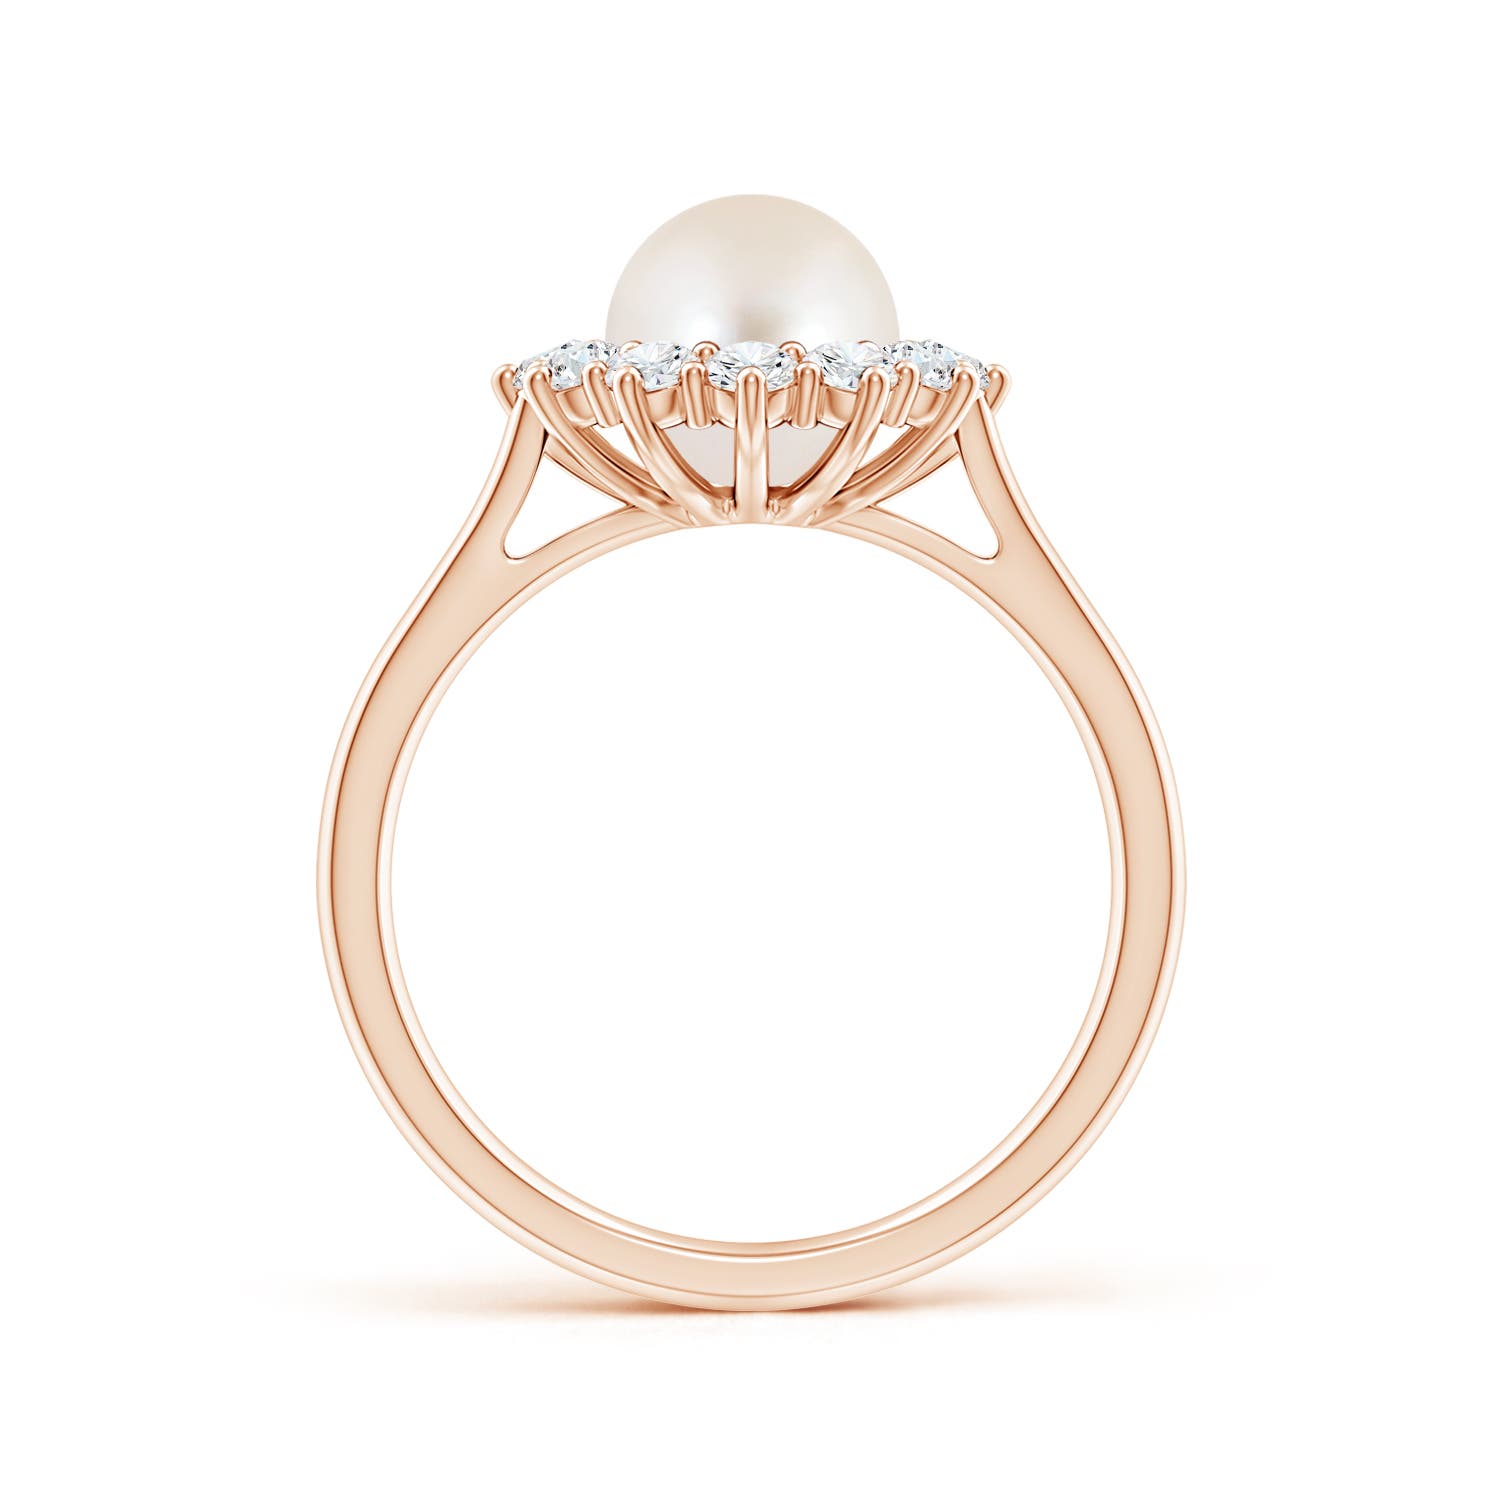 AAAA / 3 CT / 14 KT Rose Gold